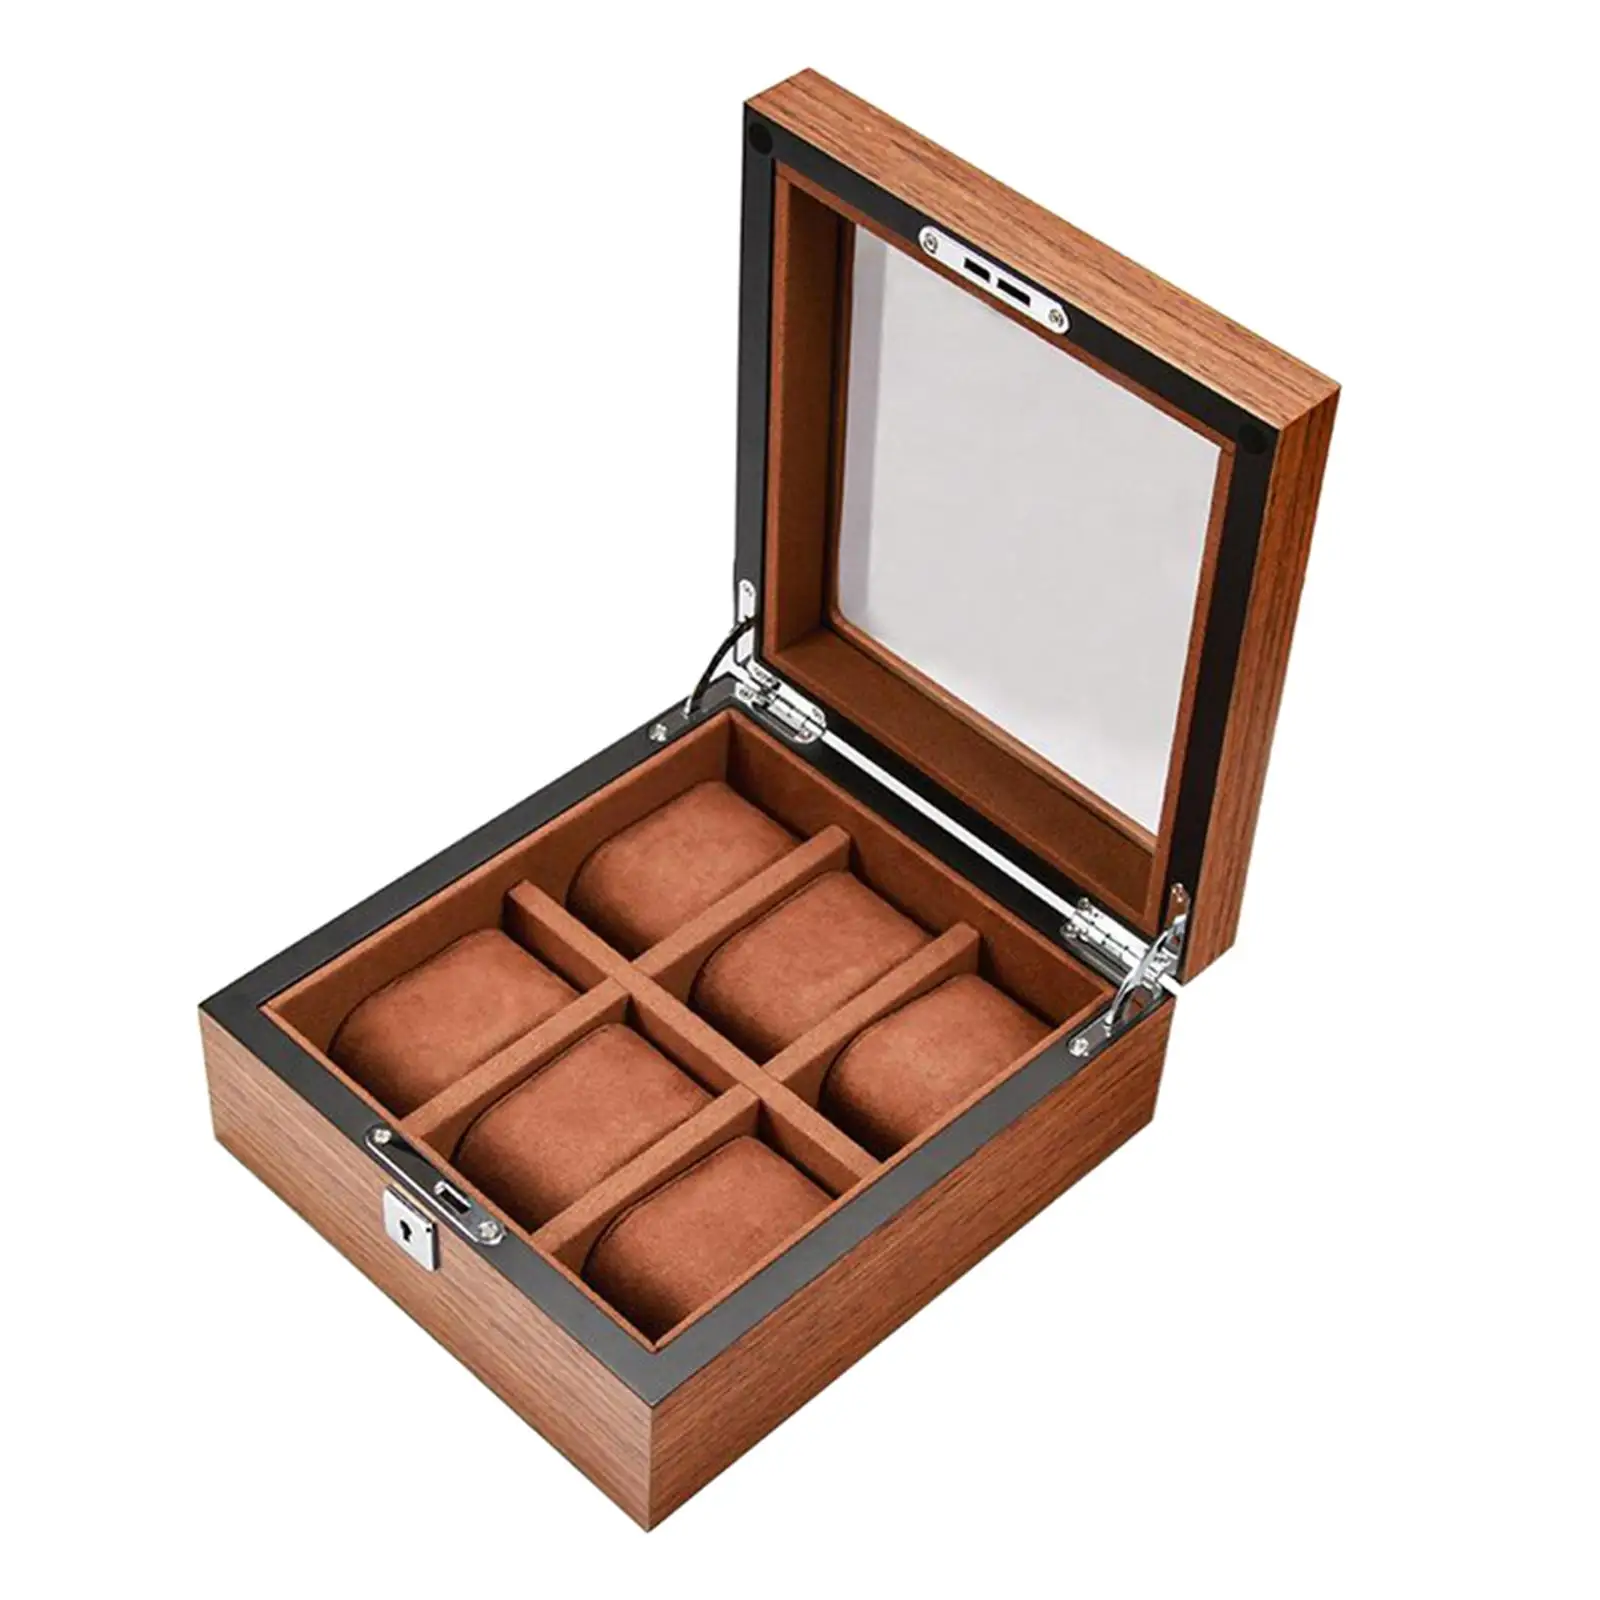 Wood Watch Box for Men WomenWatch Case Display Box,Wooden Watch Display Case Organizer with Clear Glass Window Top